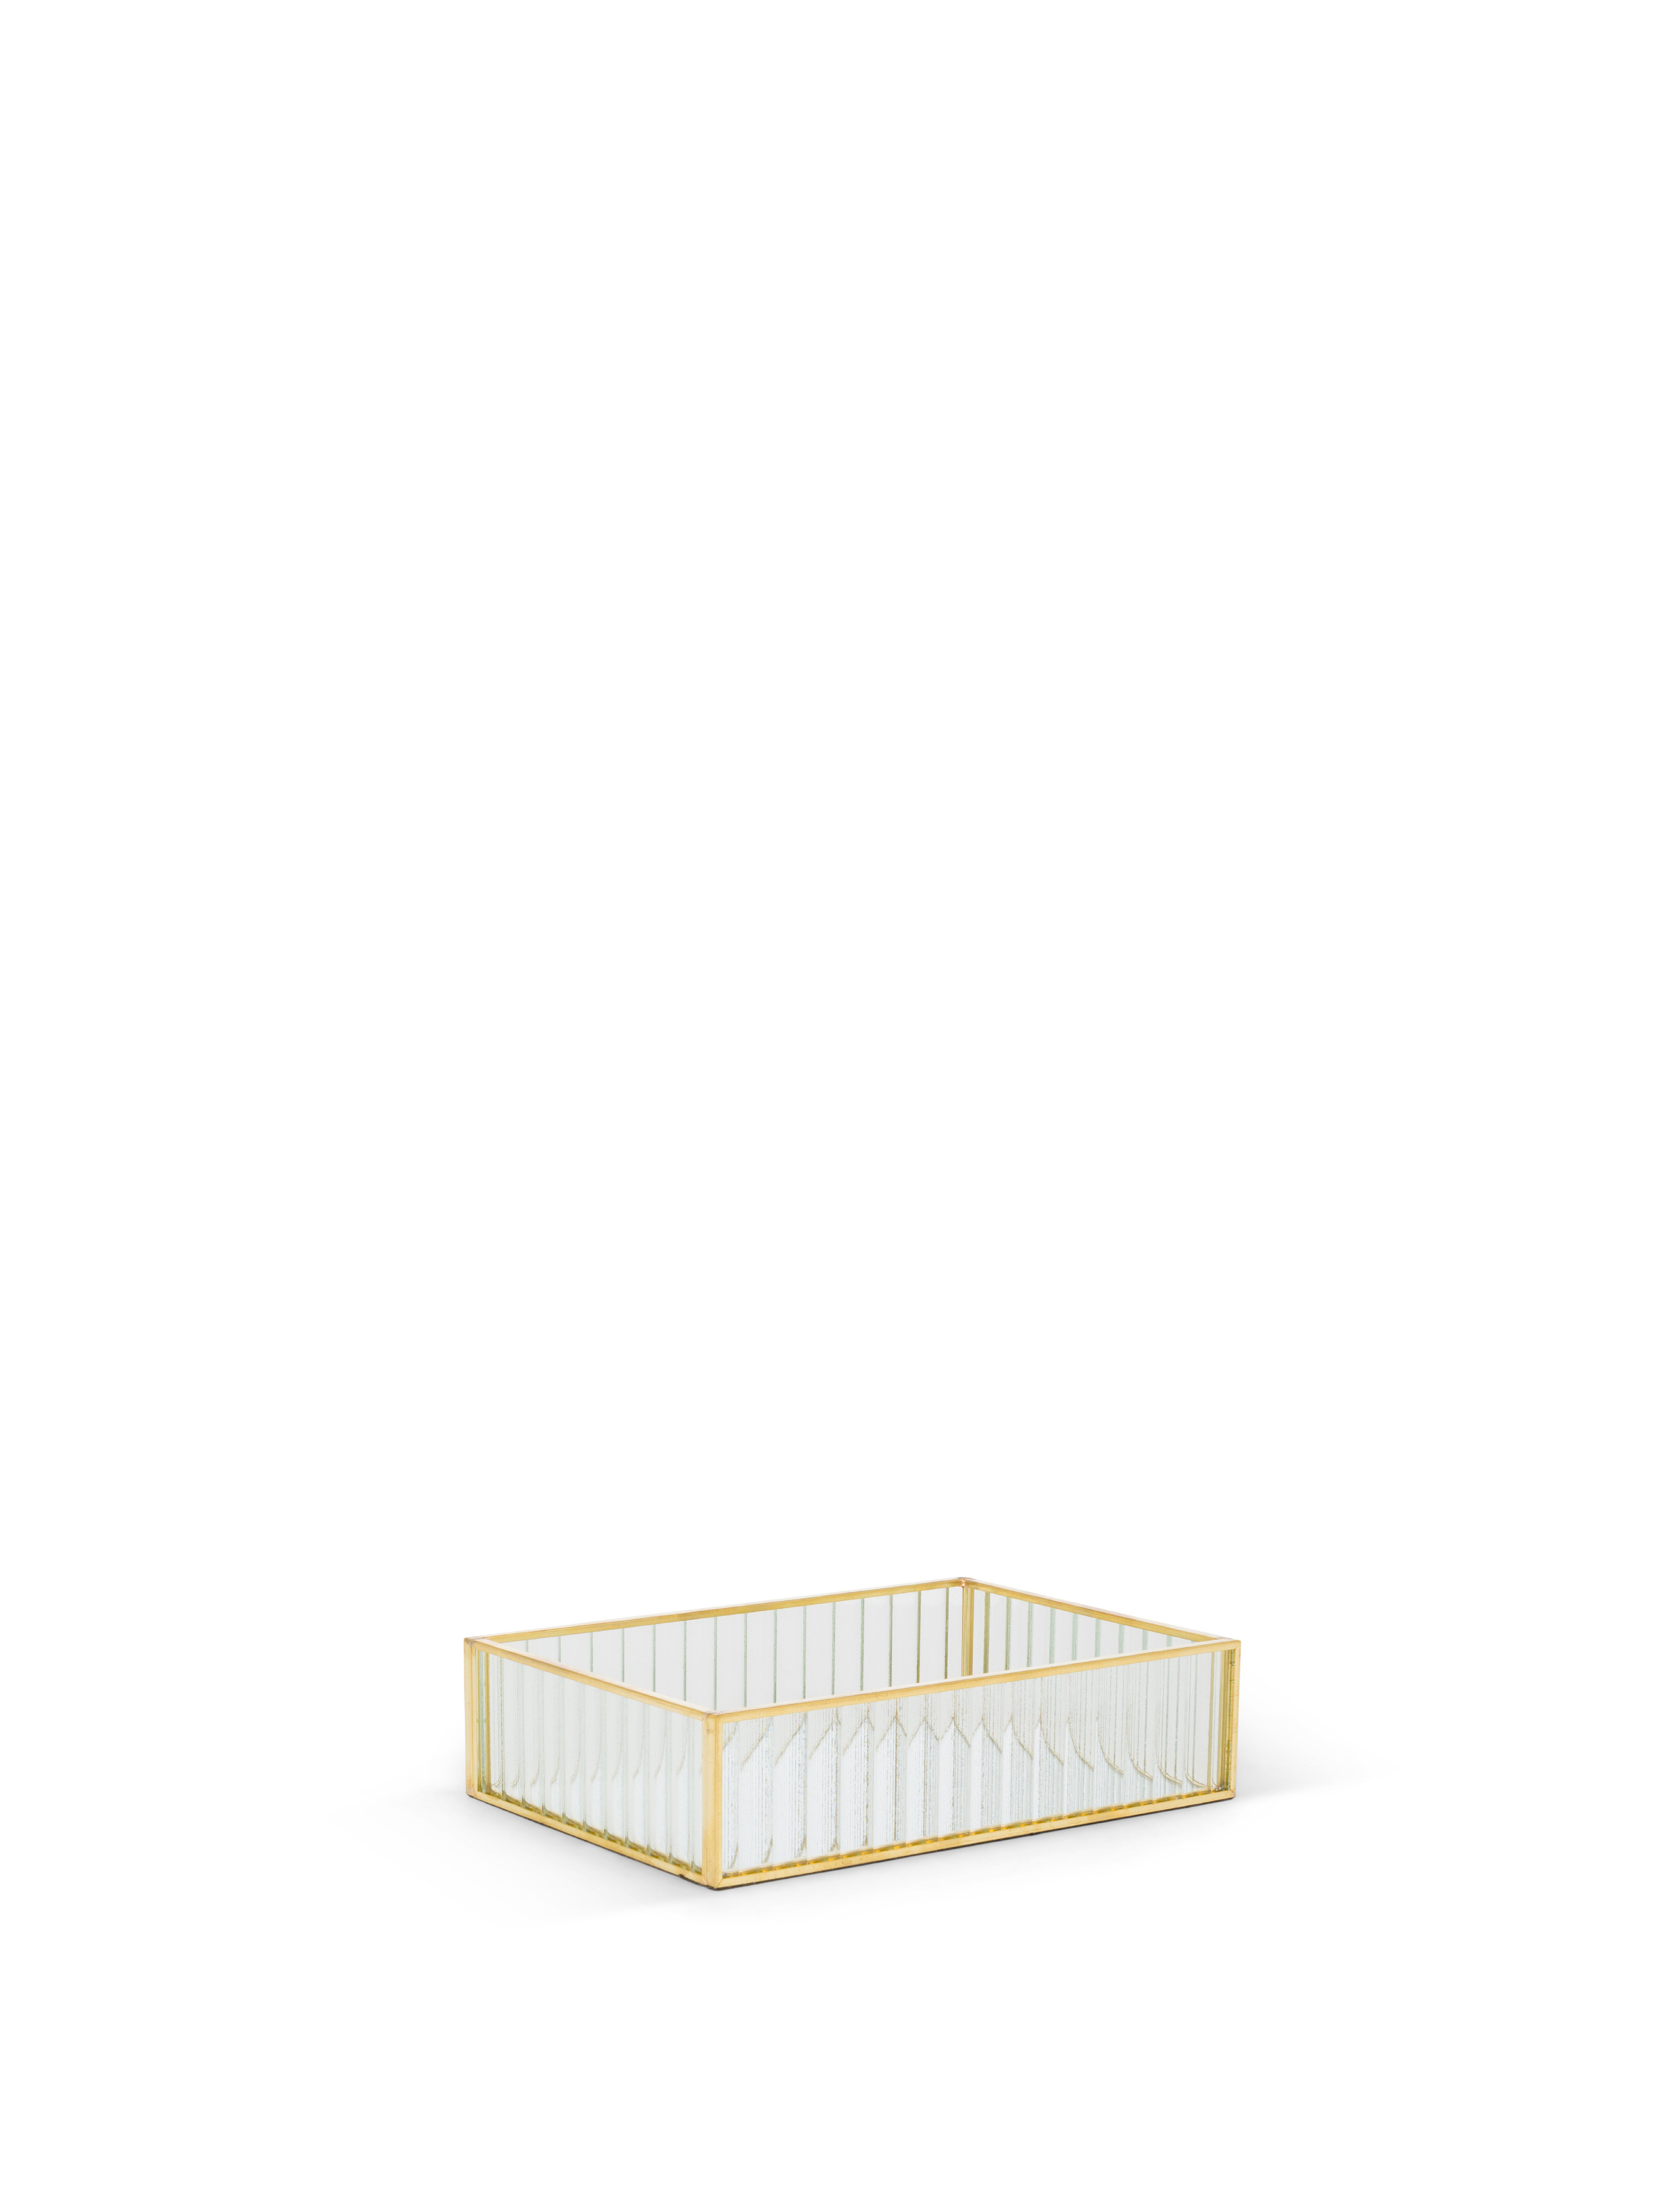 Decorative glass tray with golden edges, Gold, large image number 0